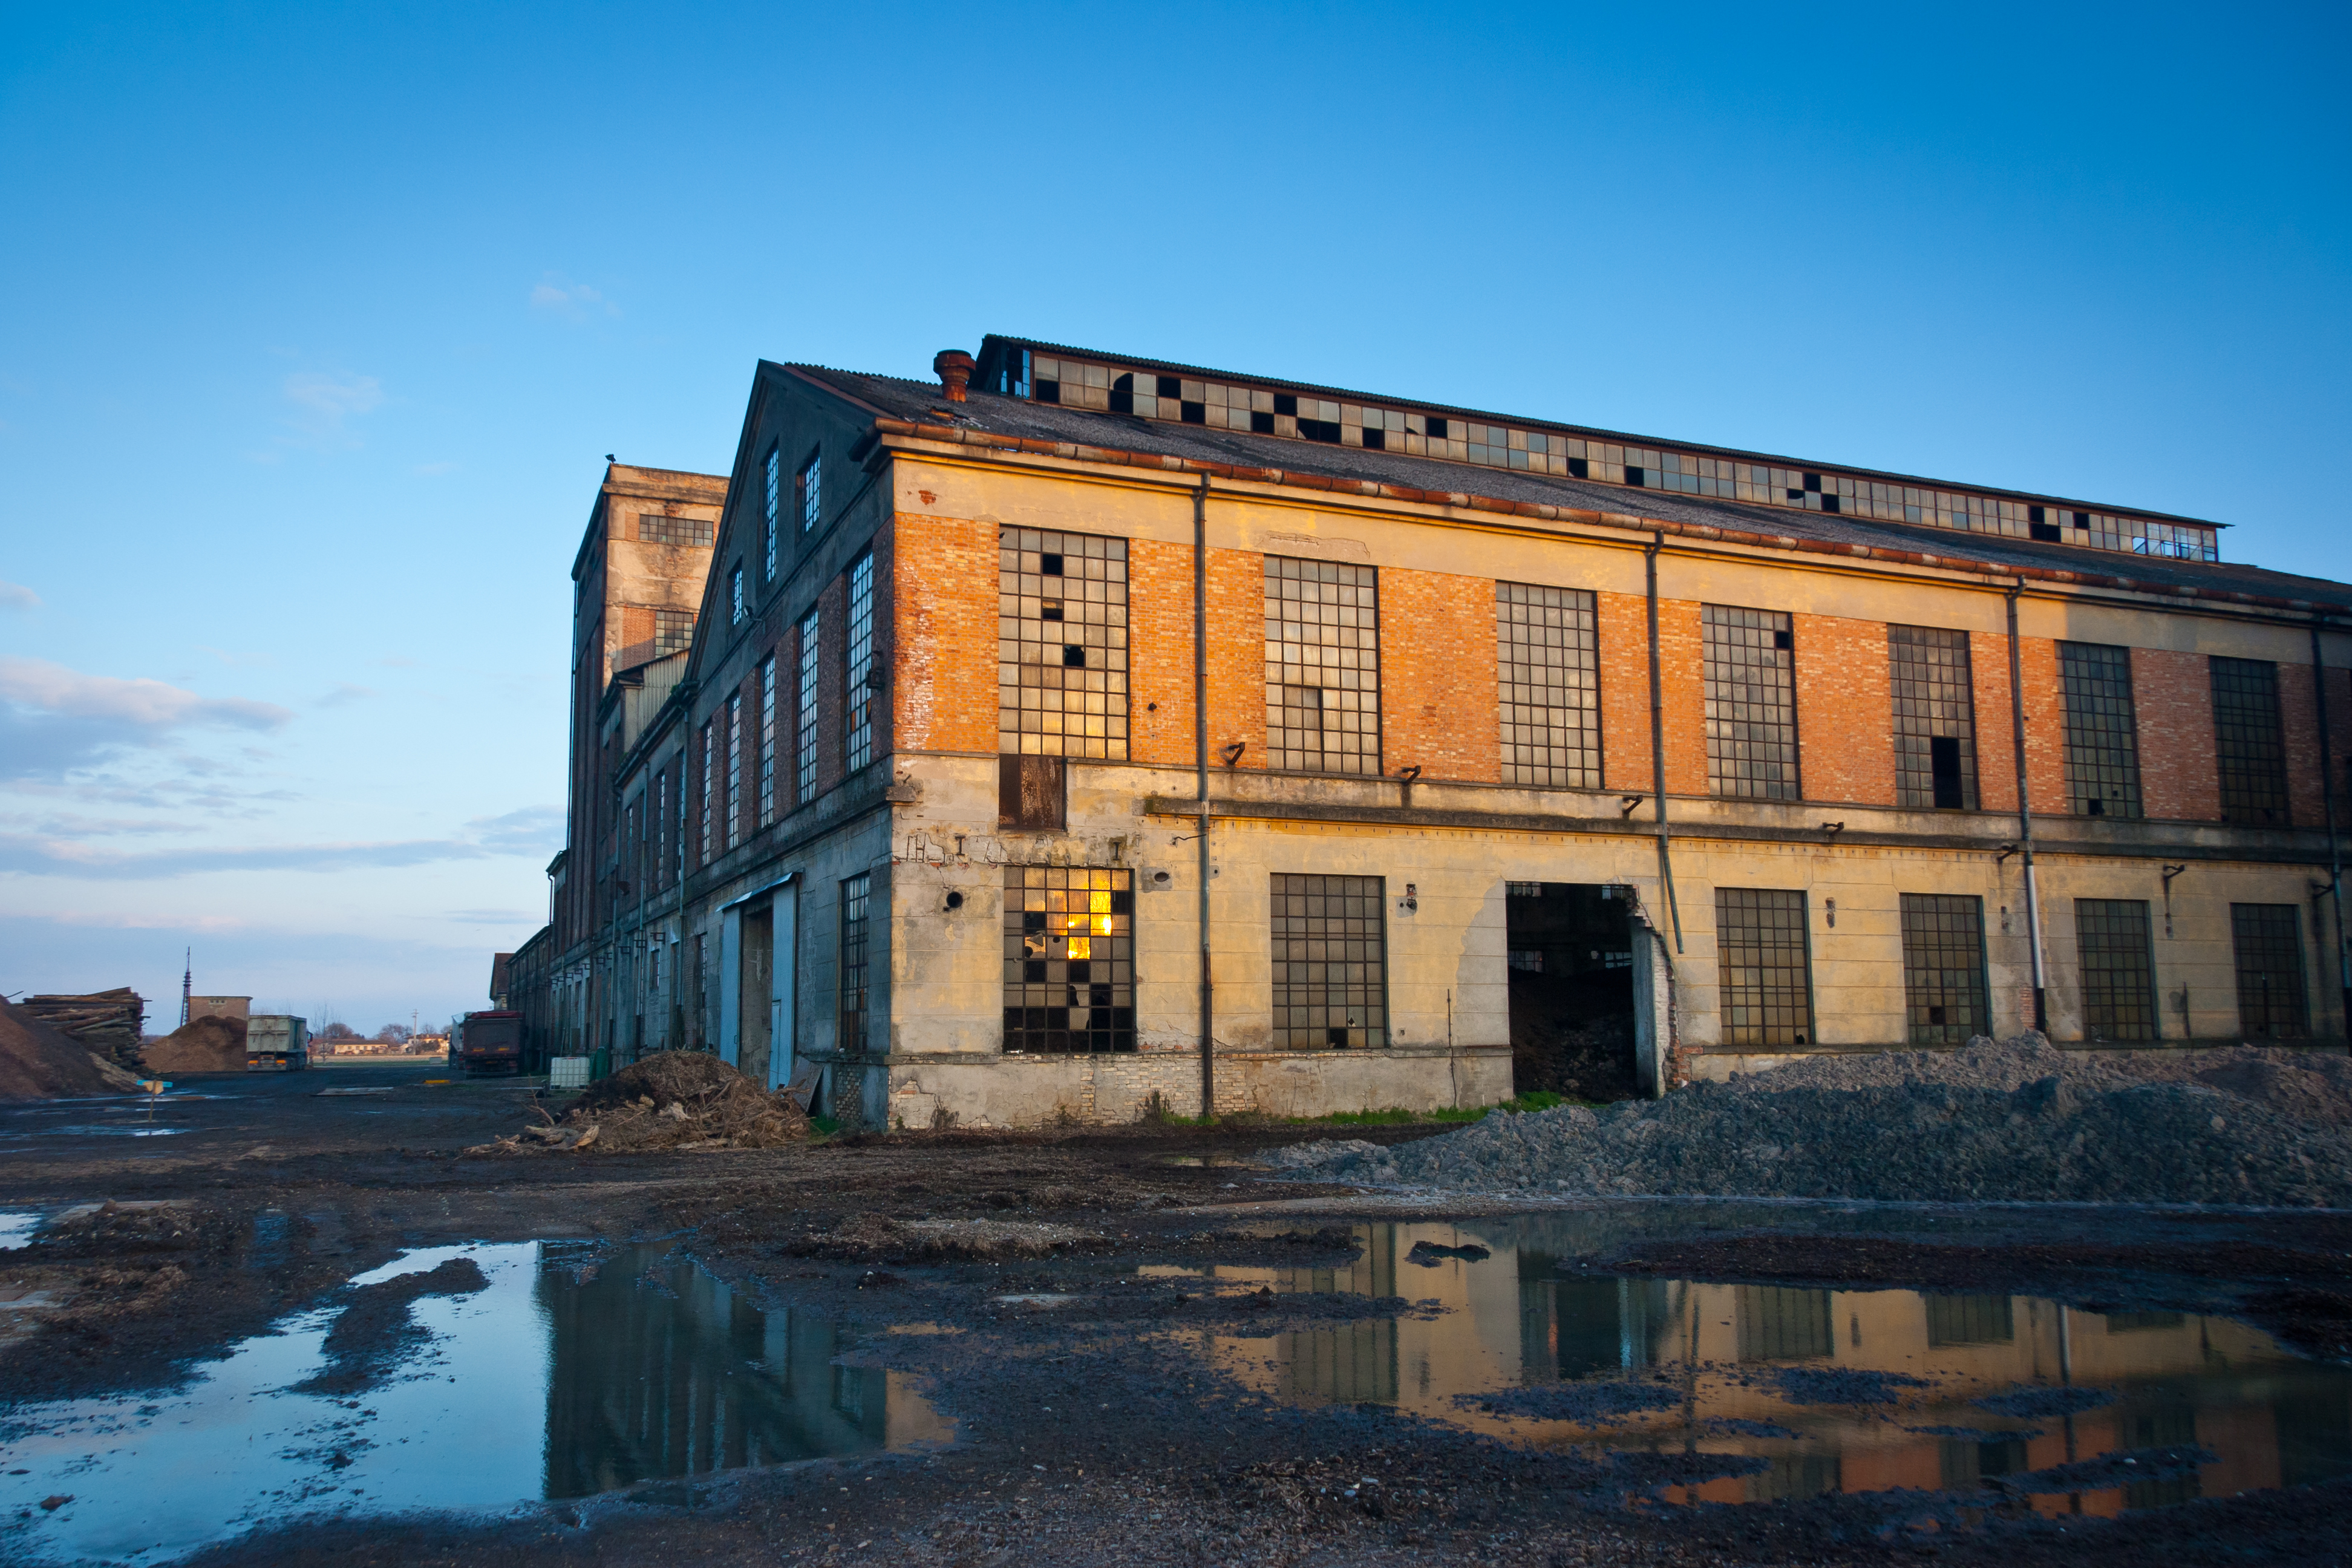 Abandoned industrial plant at sunset. | Source: Shutterstock